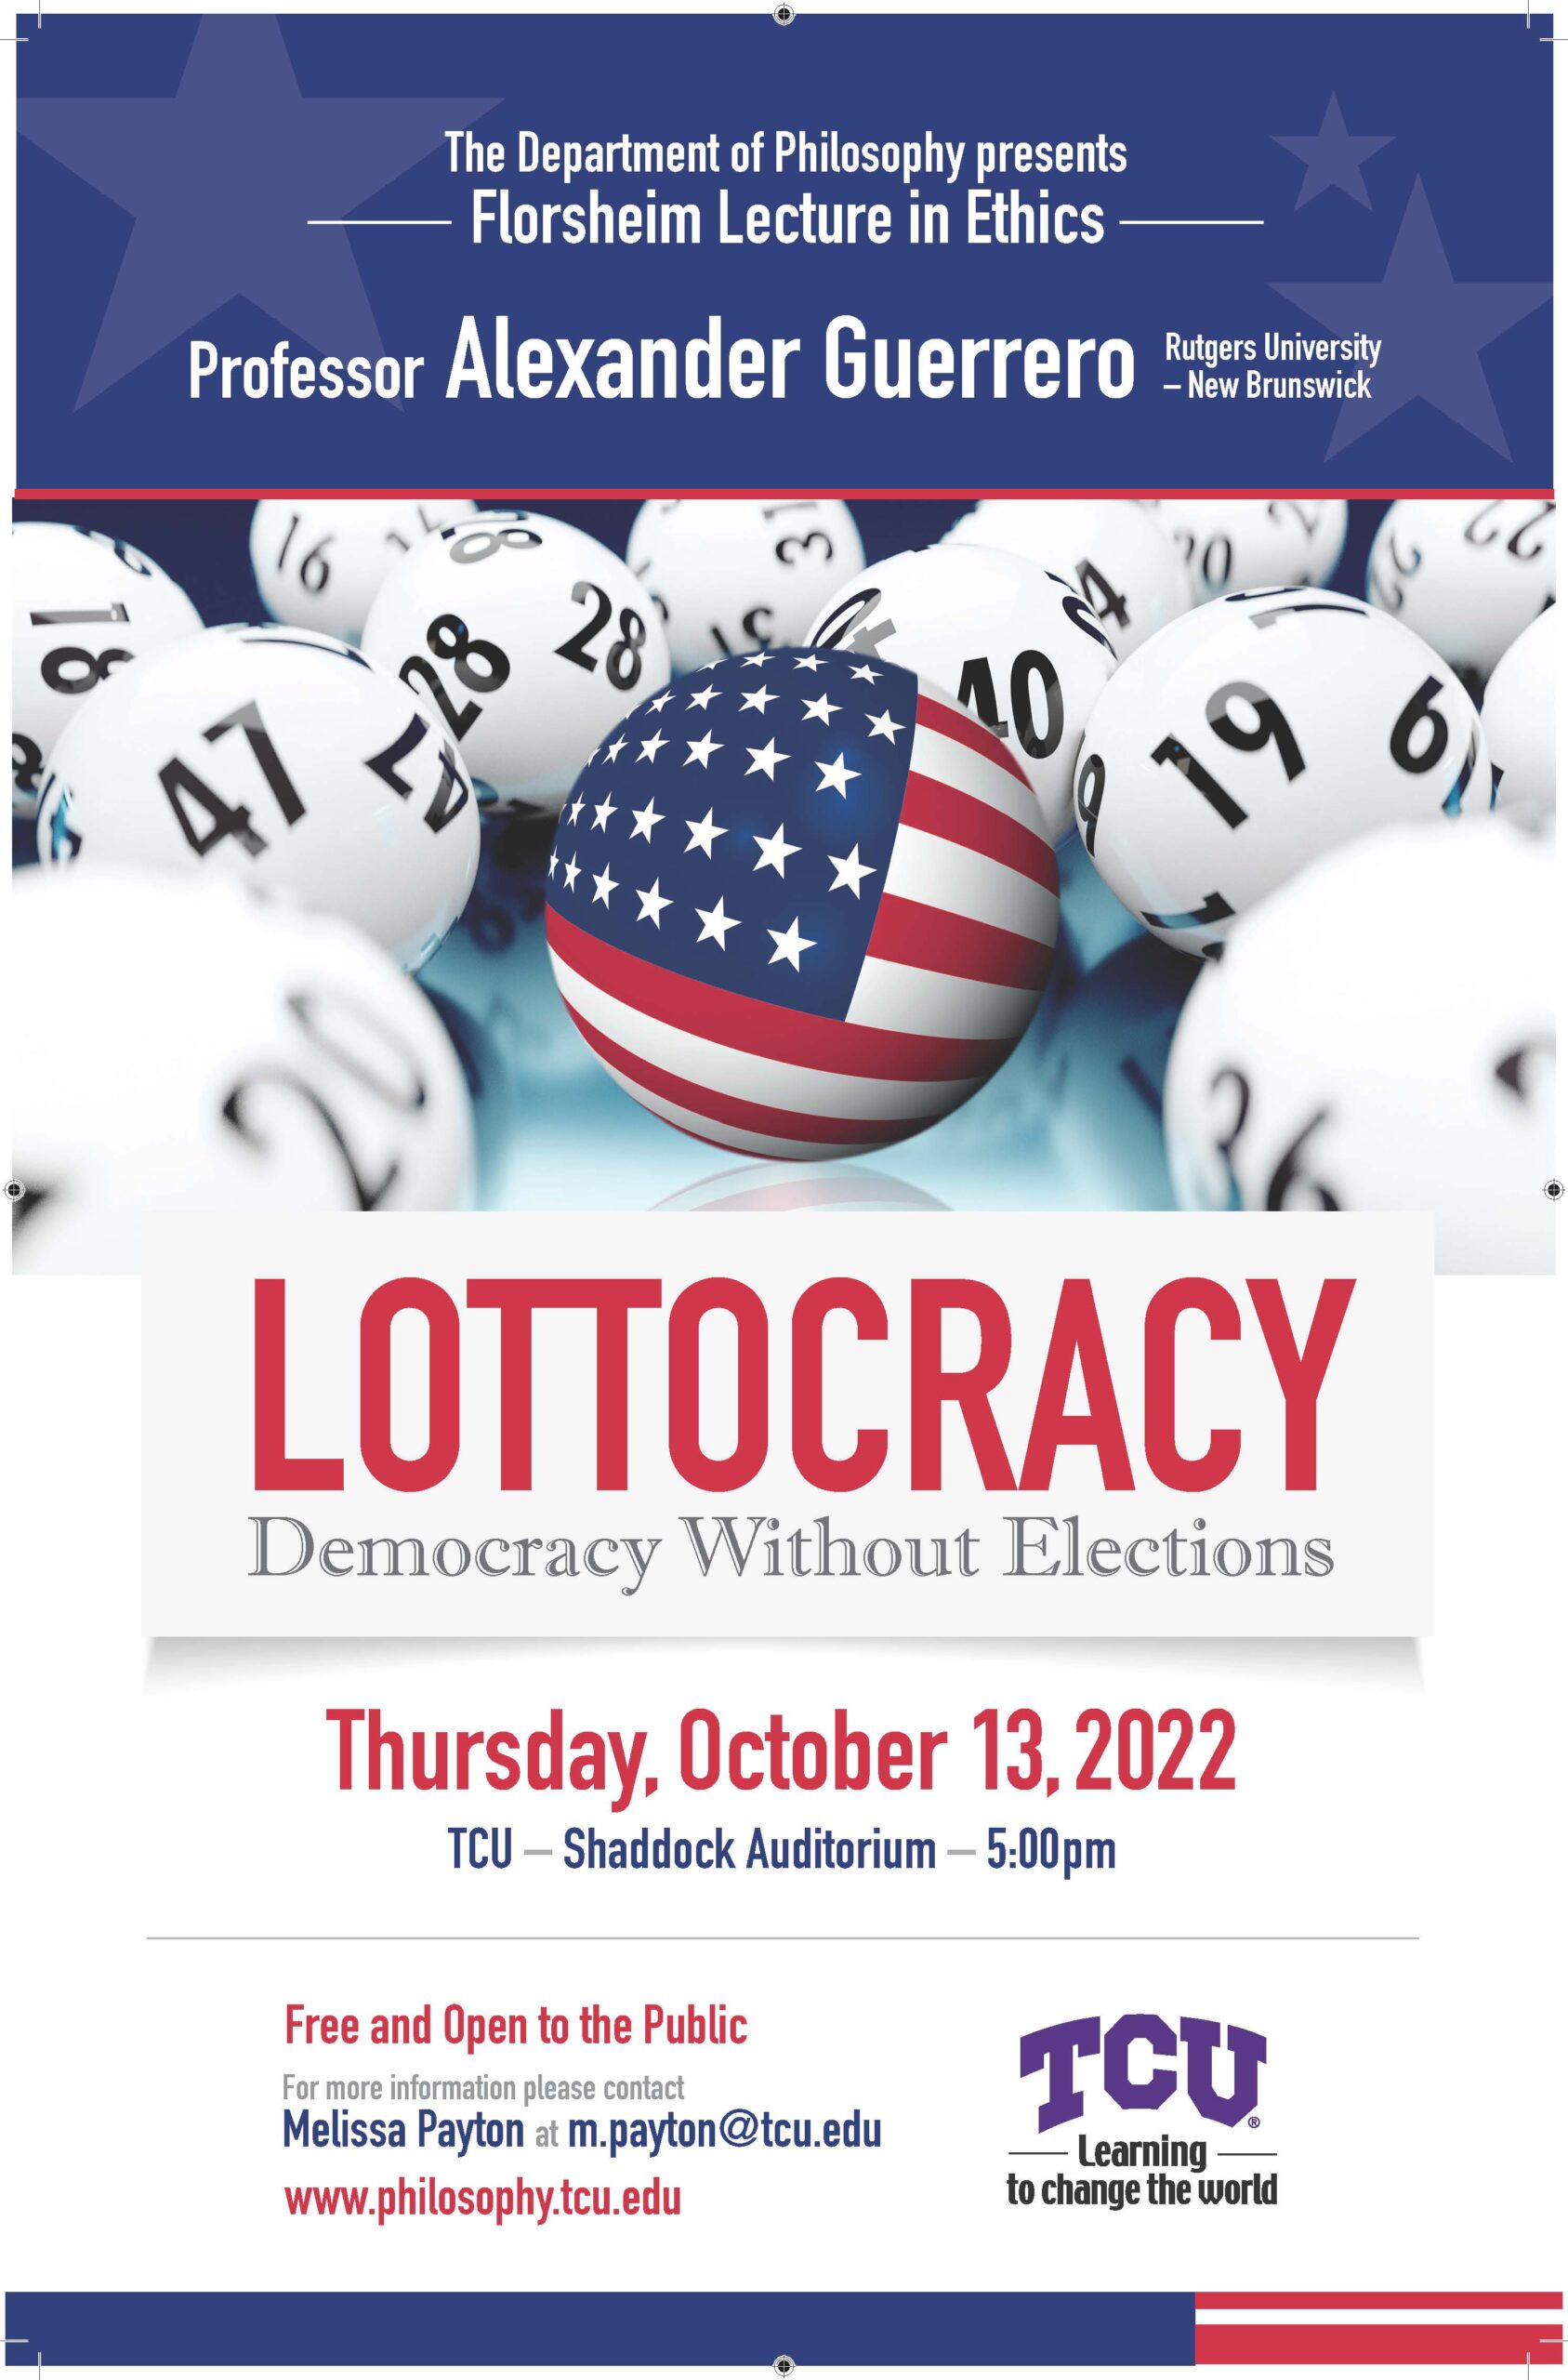 Lottocracy_Poster_(P)_FINAL POSTER_JPEG